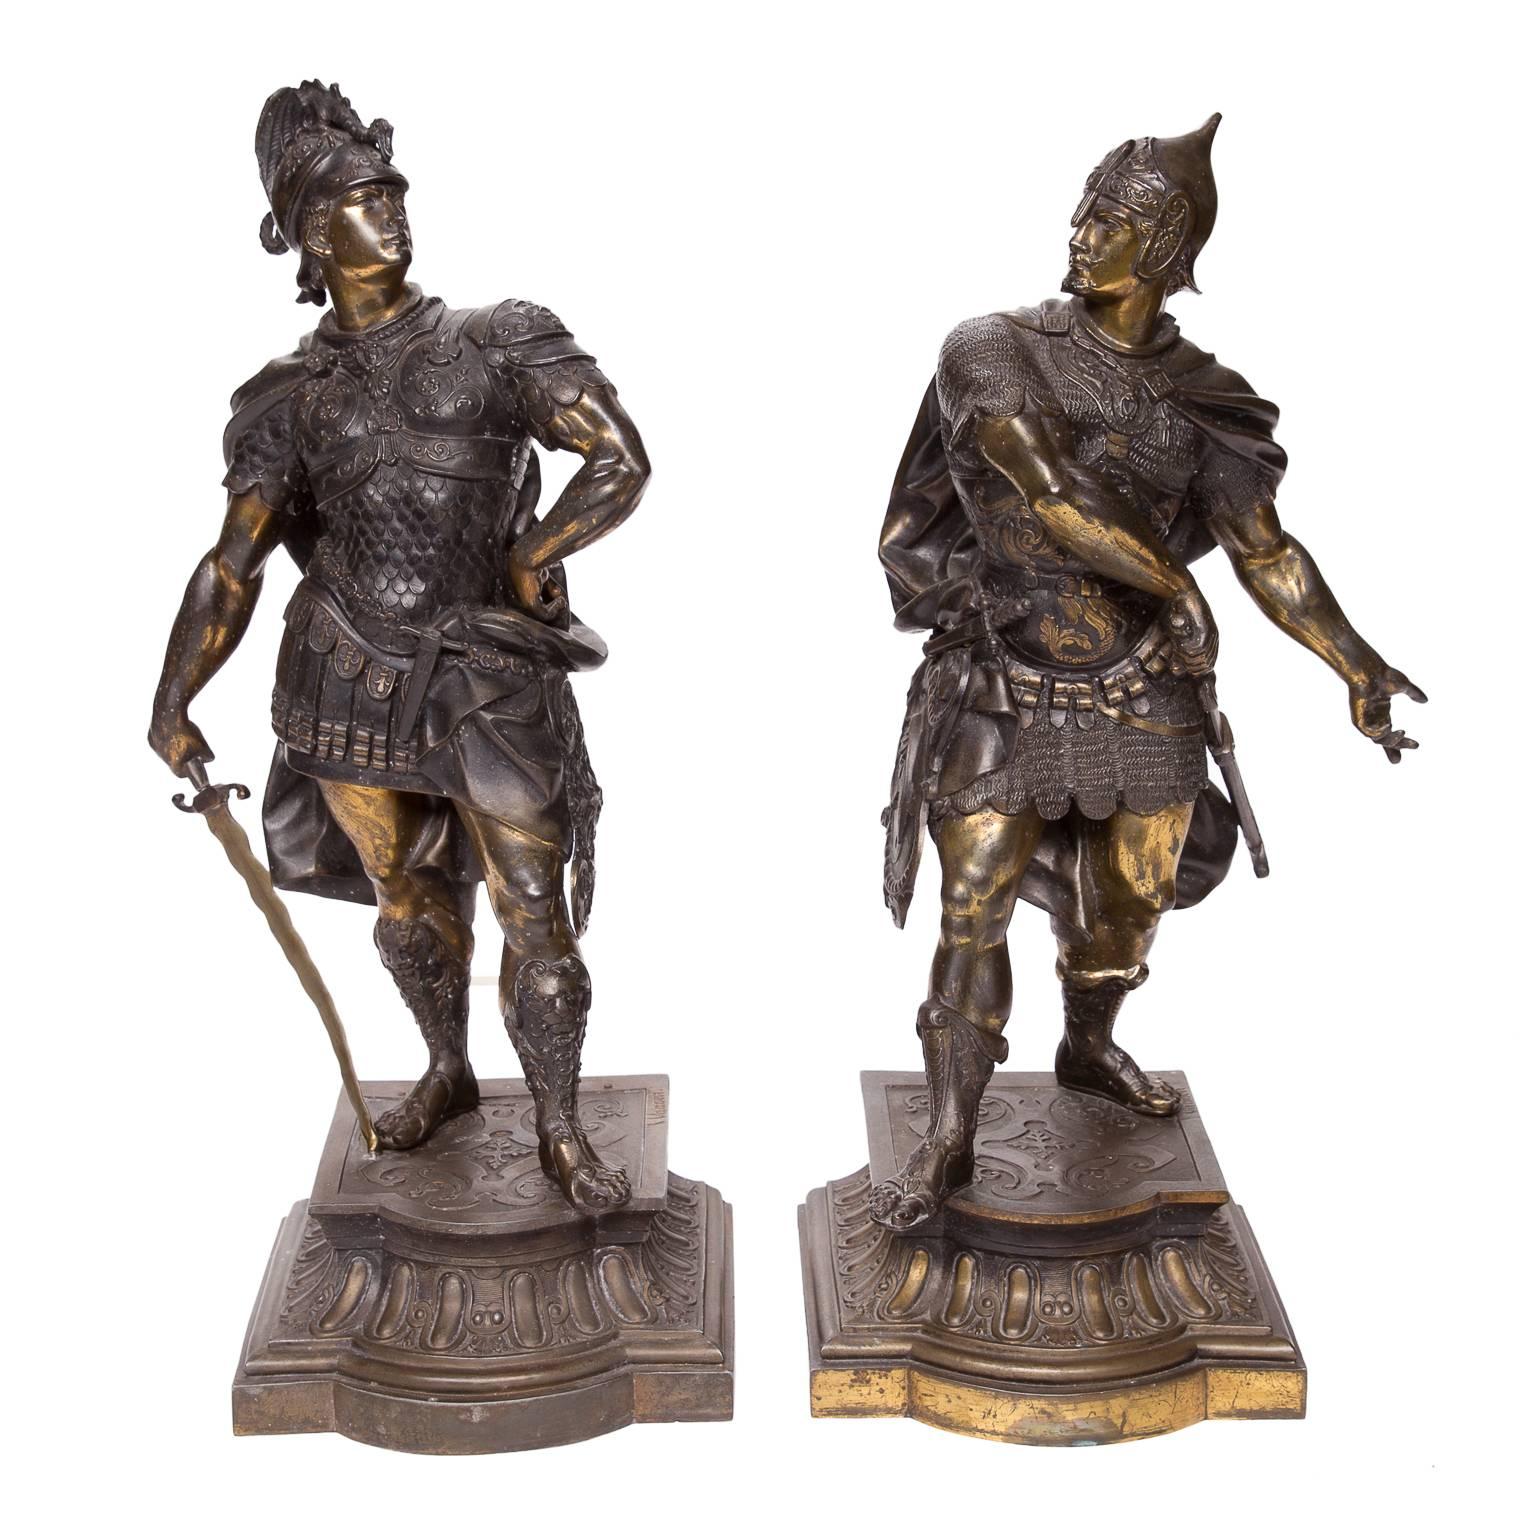 Pair of 19th Century Signed Warrior Figures in Spelter Metal